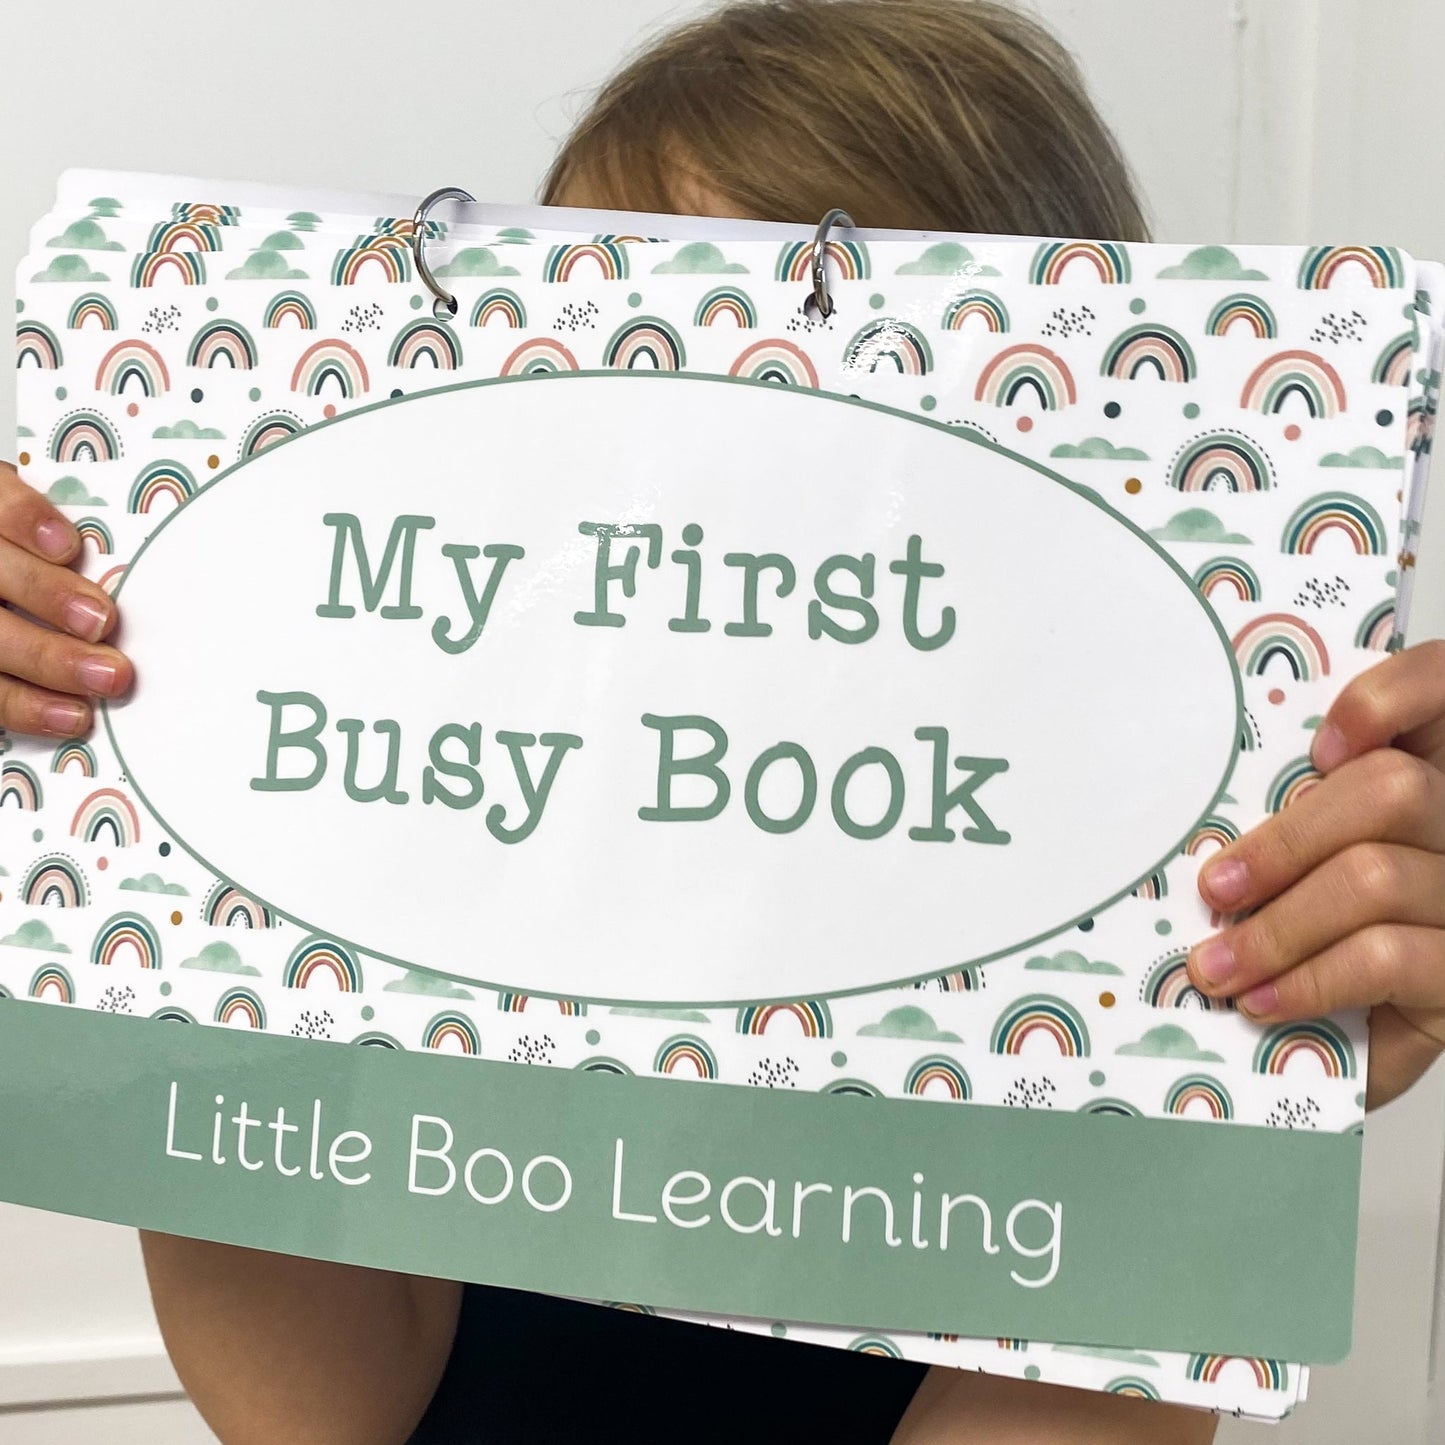 My First Busy Book is full of activities that will keep your toddler or preschooler entertained while they learn to recognise shapes and colours, count to 10 and spot farm animals and more.